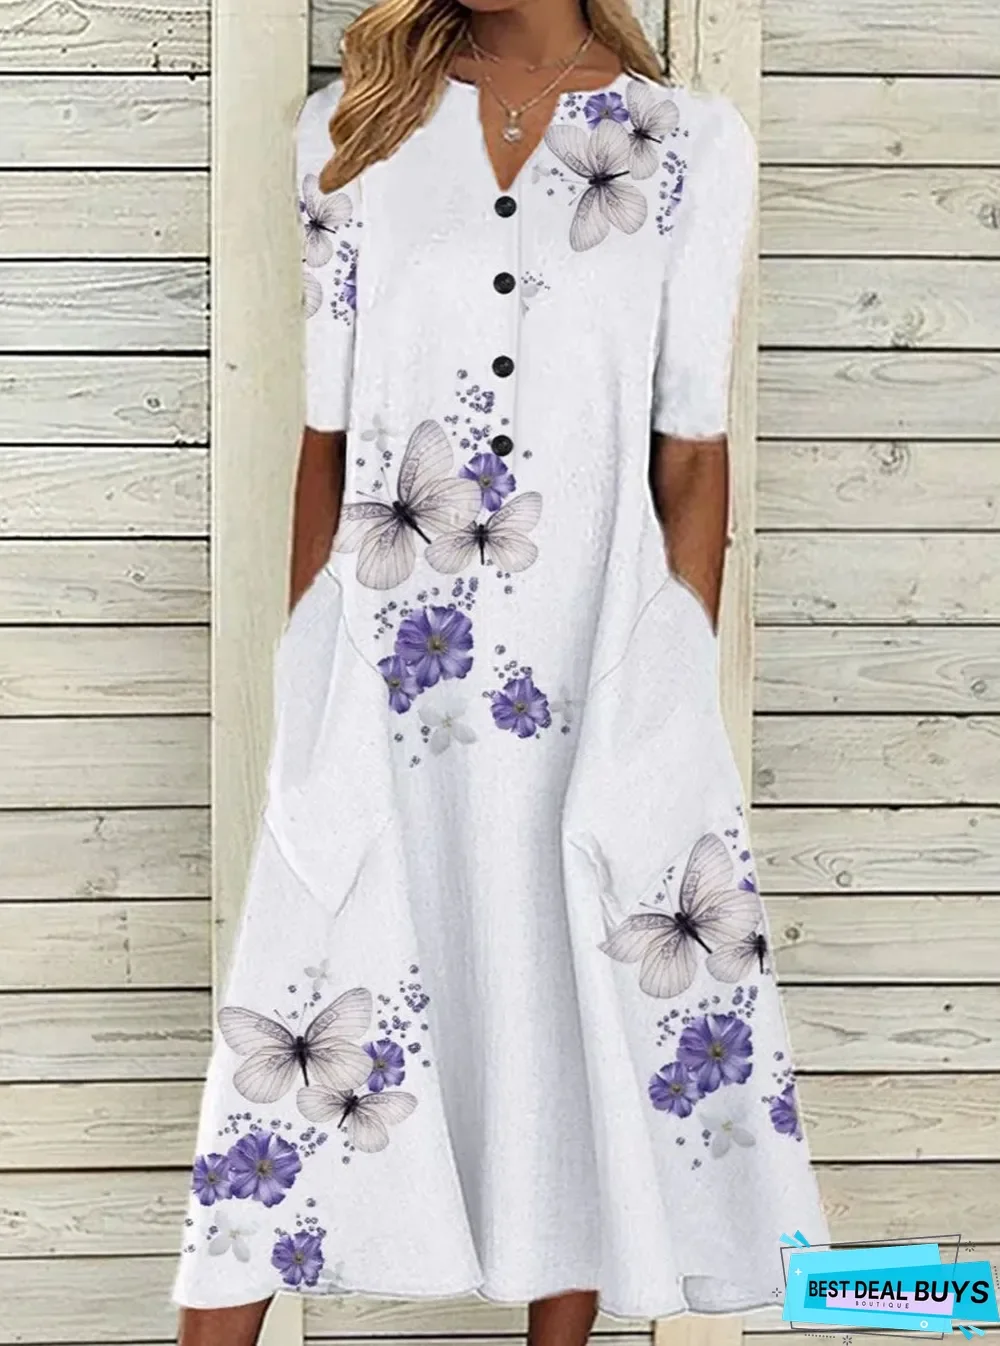 Butterfly Print Long Sleeve Casual Maxi Dress White Dresses